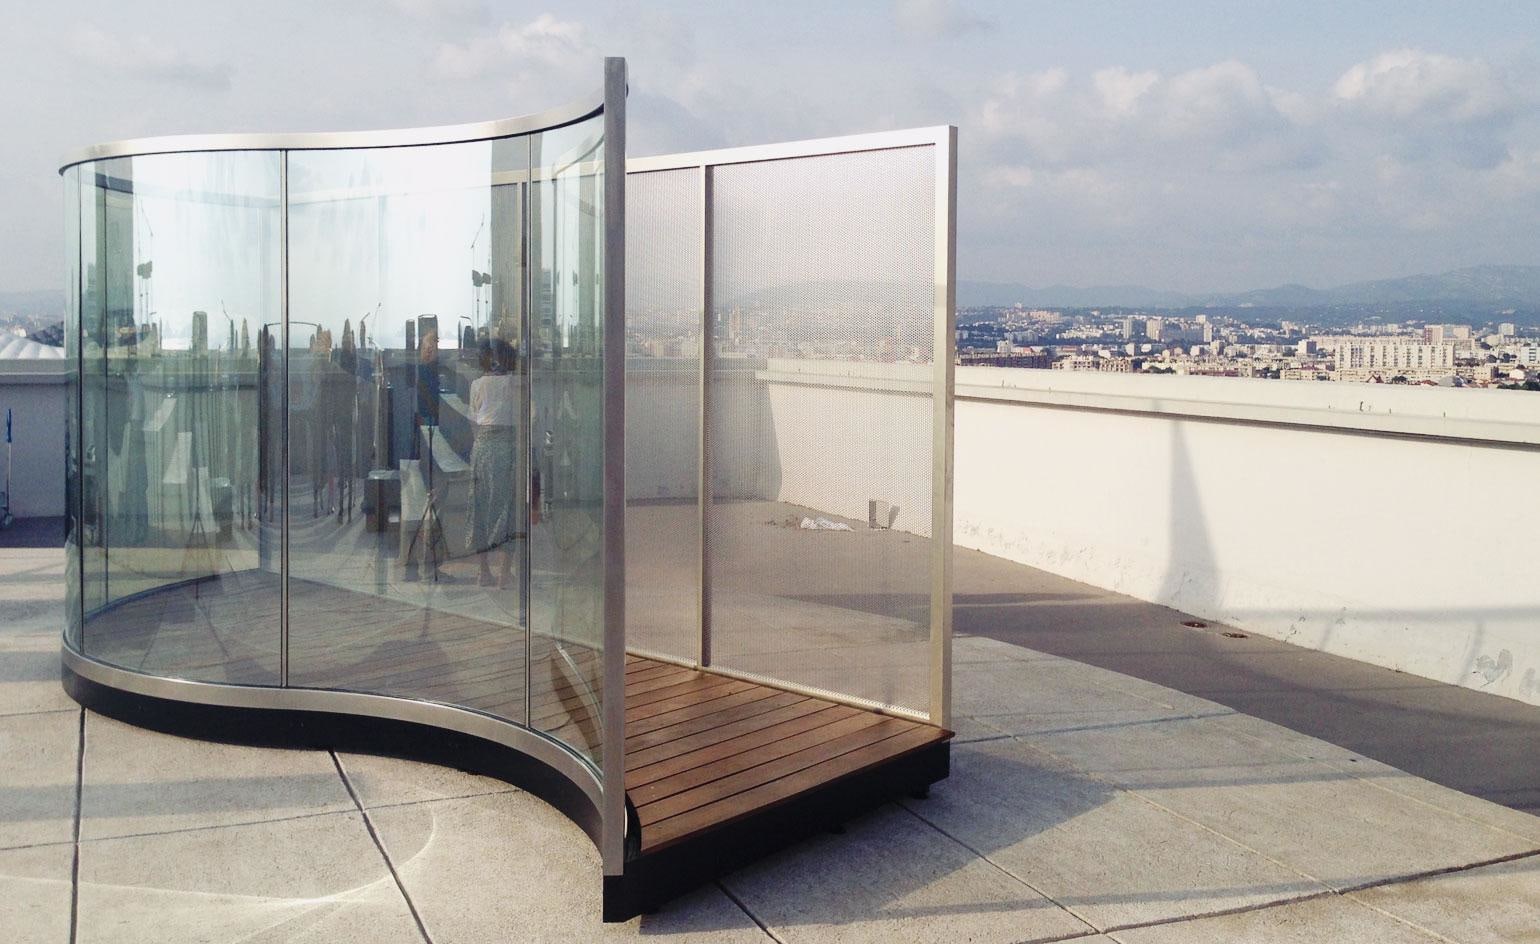 Dan Graham

Tight Squeeze

2015

Two-way mirror, perforated metal, stainless steel
90 1/2 x 200 x 70 7/16 inches (230 x 508 x 179 cm)

Installation view, Observatory/Playground, MAMO, Centre d&amp;rsquo;Art de la Cit&amp;eacute; Radieuse, Marseille, France

Photo:&amp;nbsp;S&amp;eacute;bastien Veronese

&amp;nbsp;

INQUIRE